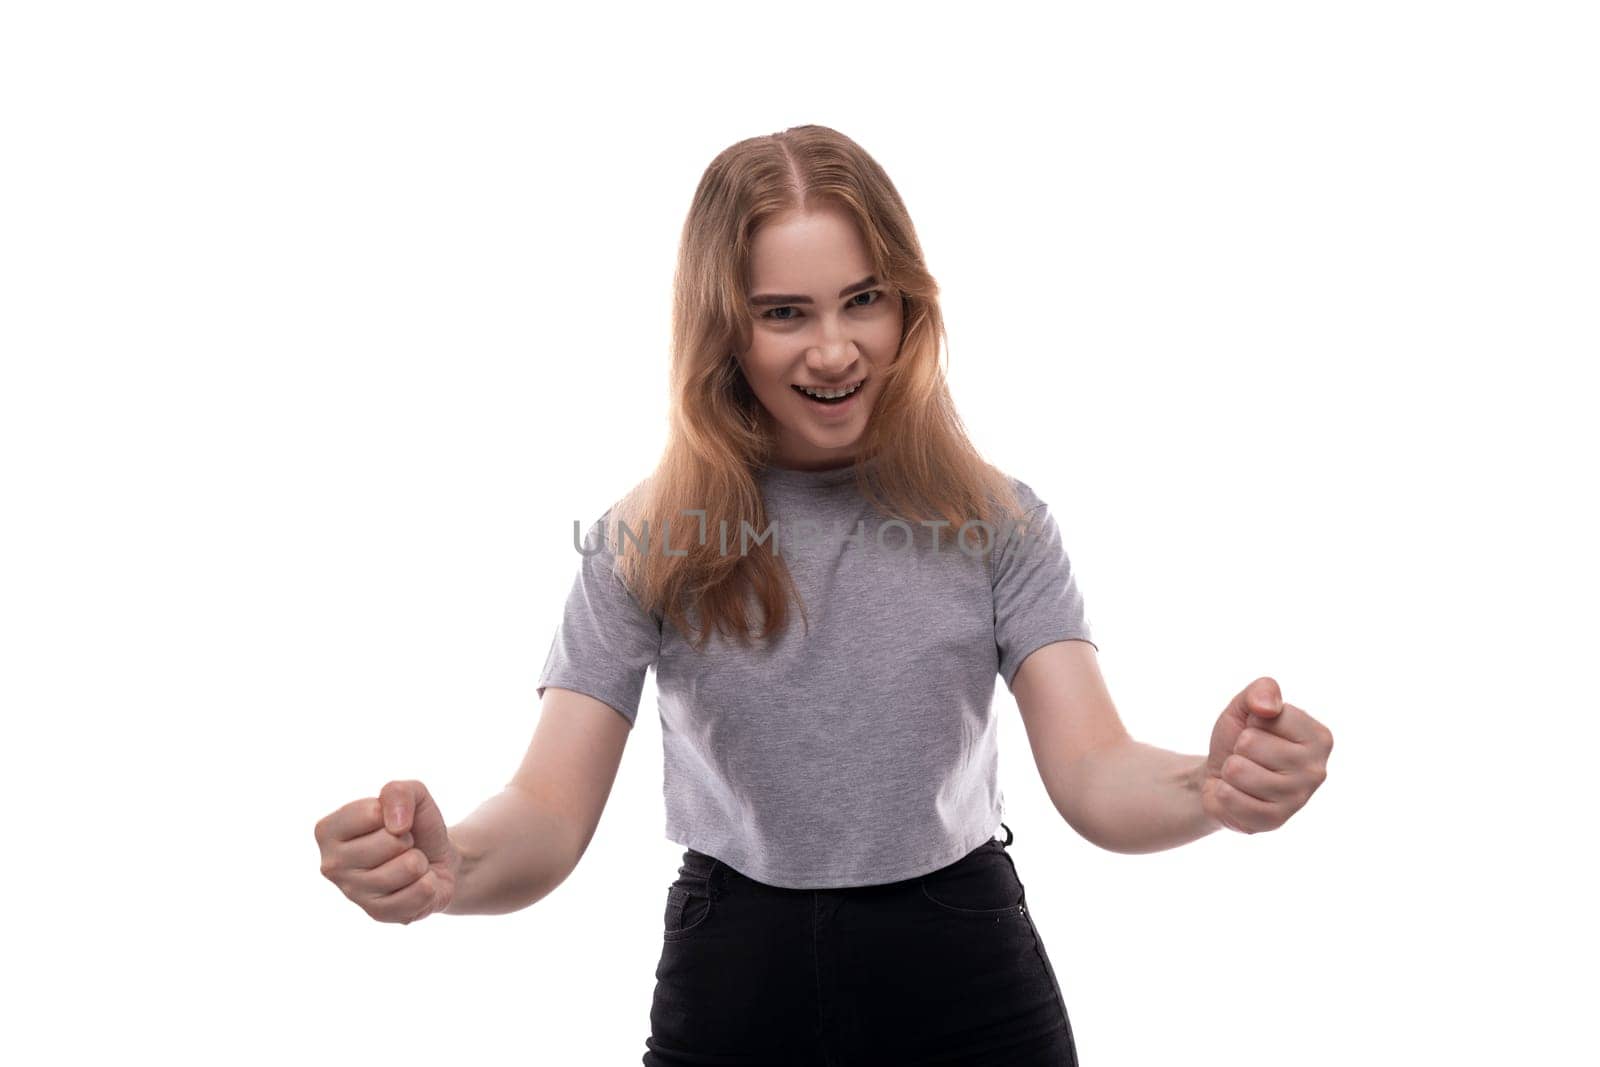 Portrait of a teenage girl with blond hair in a gray T-shirt on a white background.